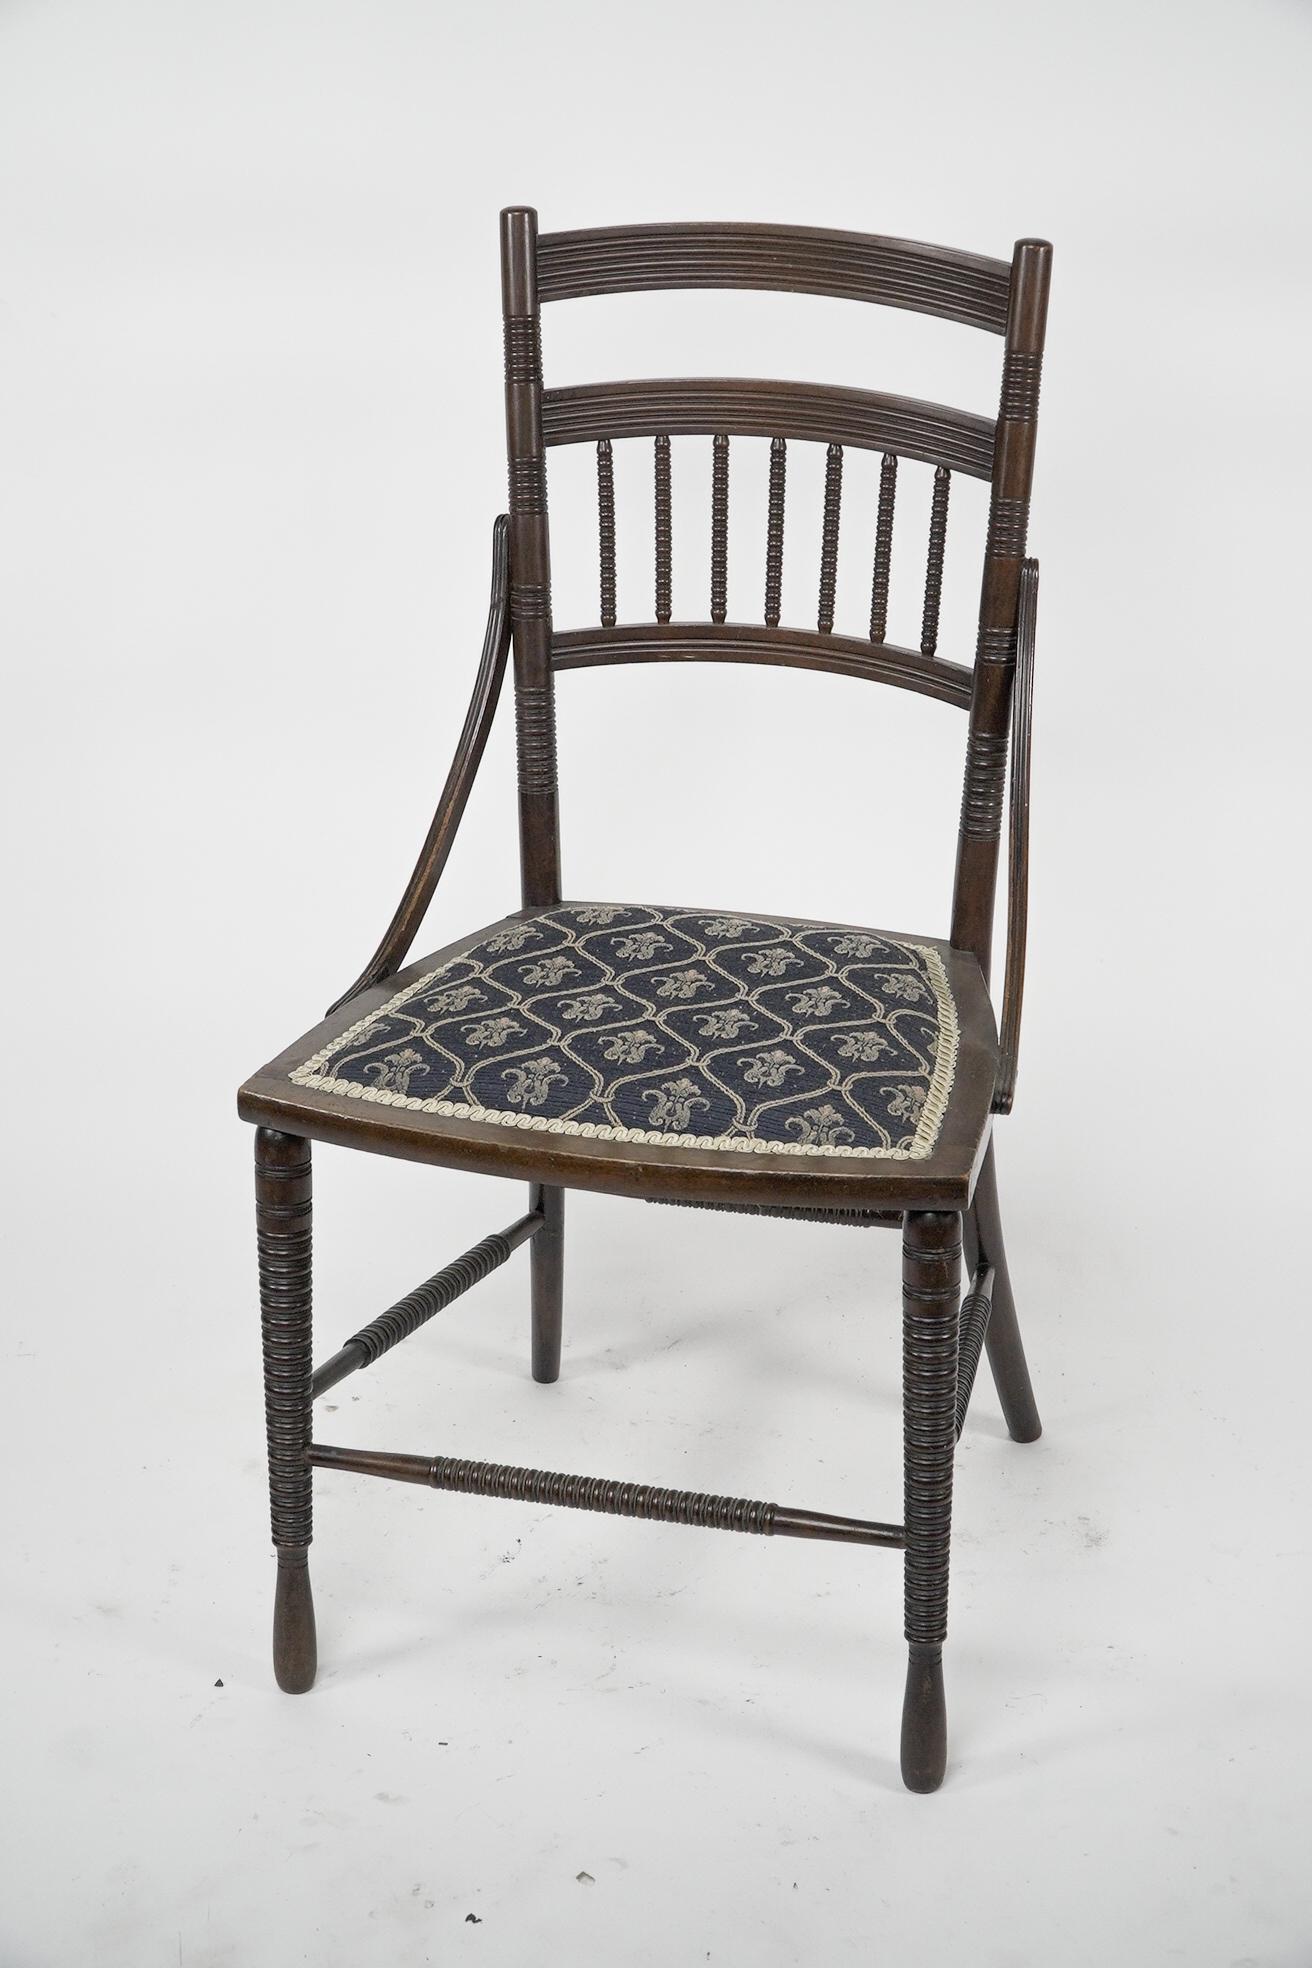 Late 19th Century R. W. Edis, probably made by Jackson & Graham A fine pair of Walnut side chairs For Sale